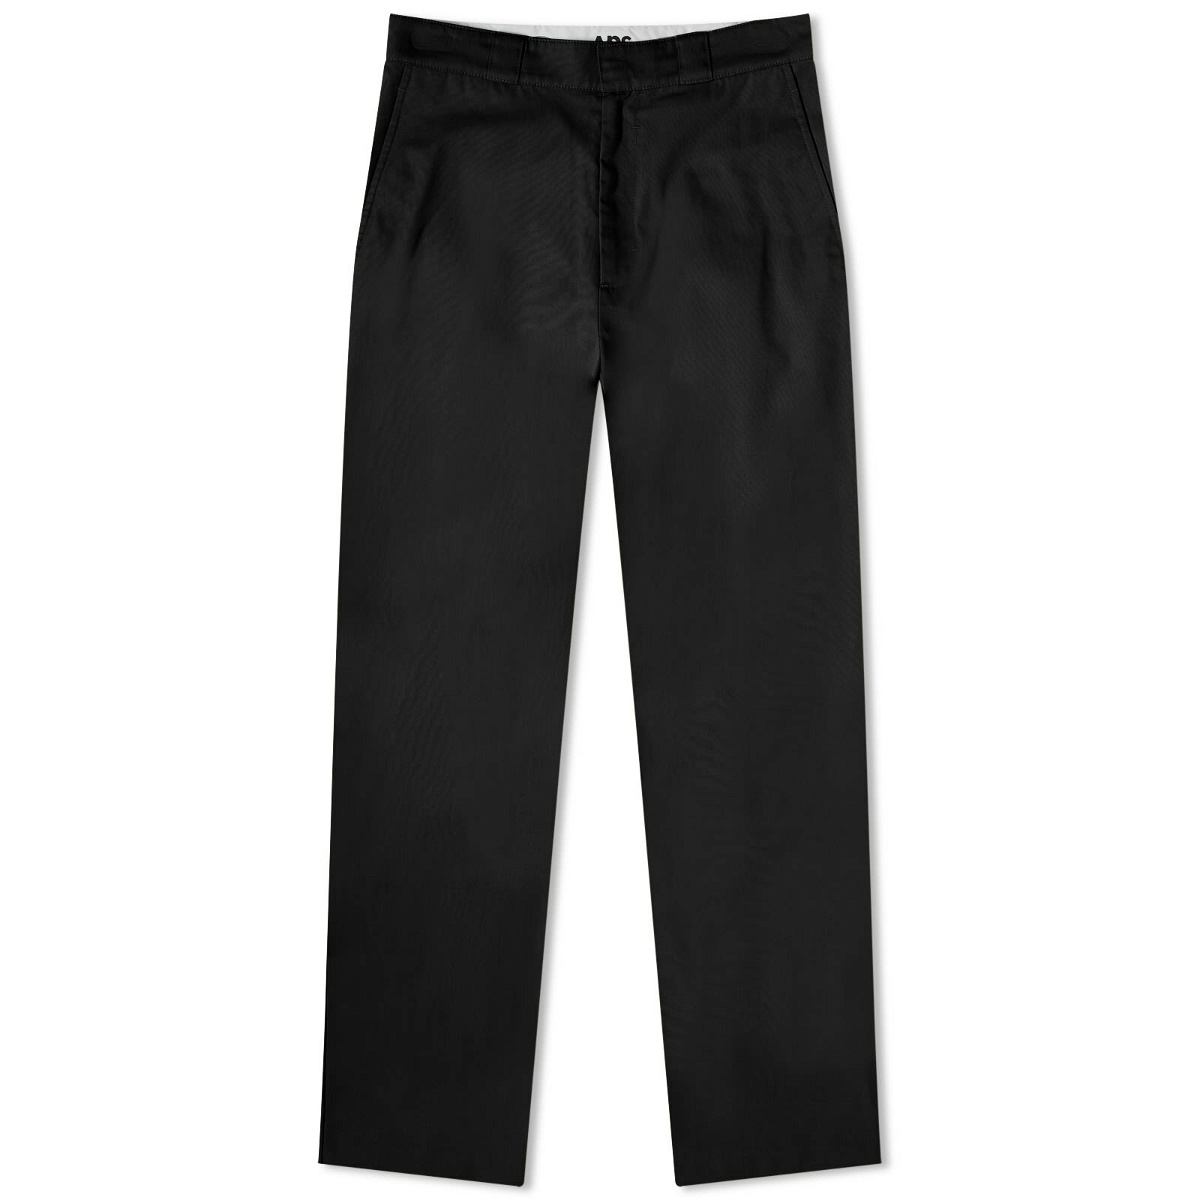 Givenchy Men's Workwear Pant in Black Givenchy